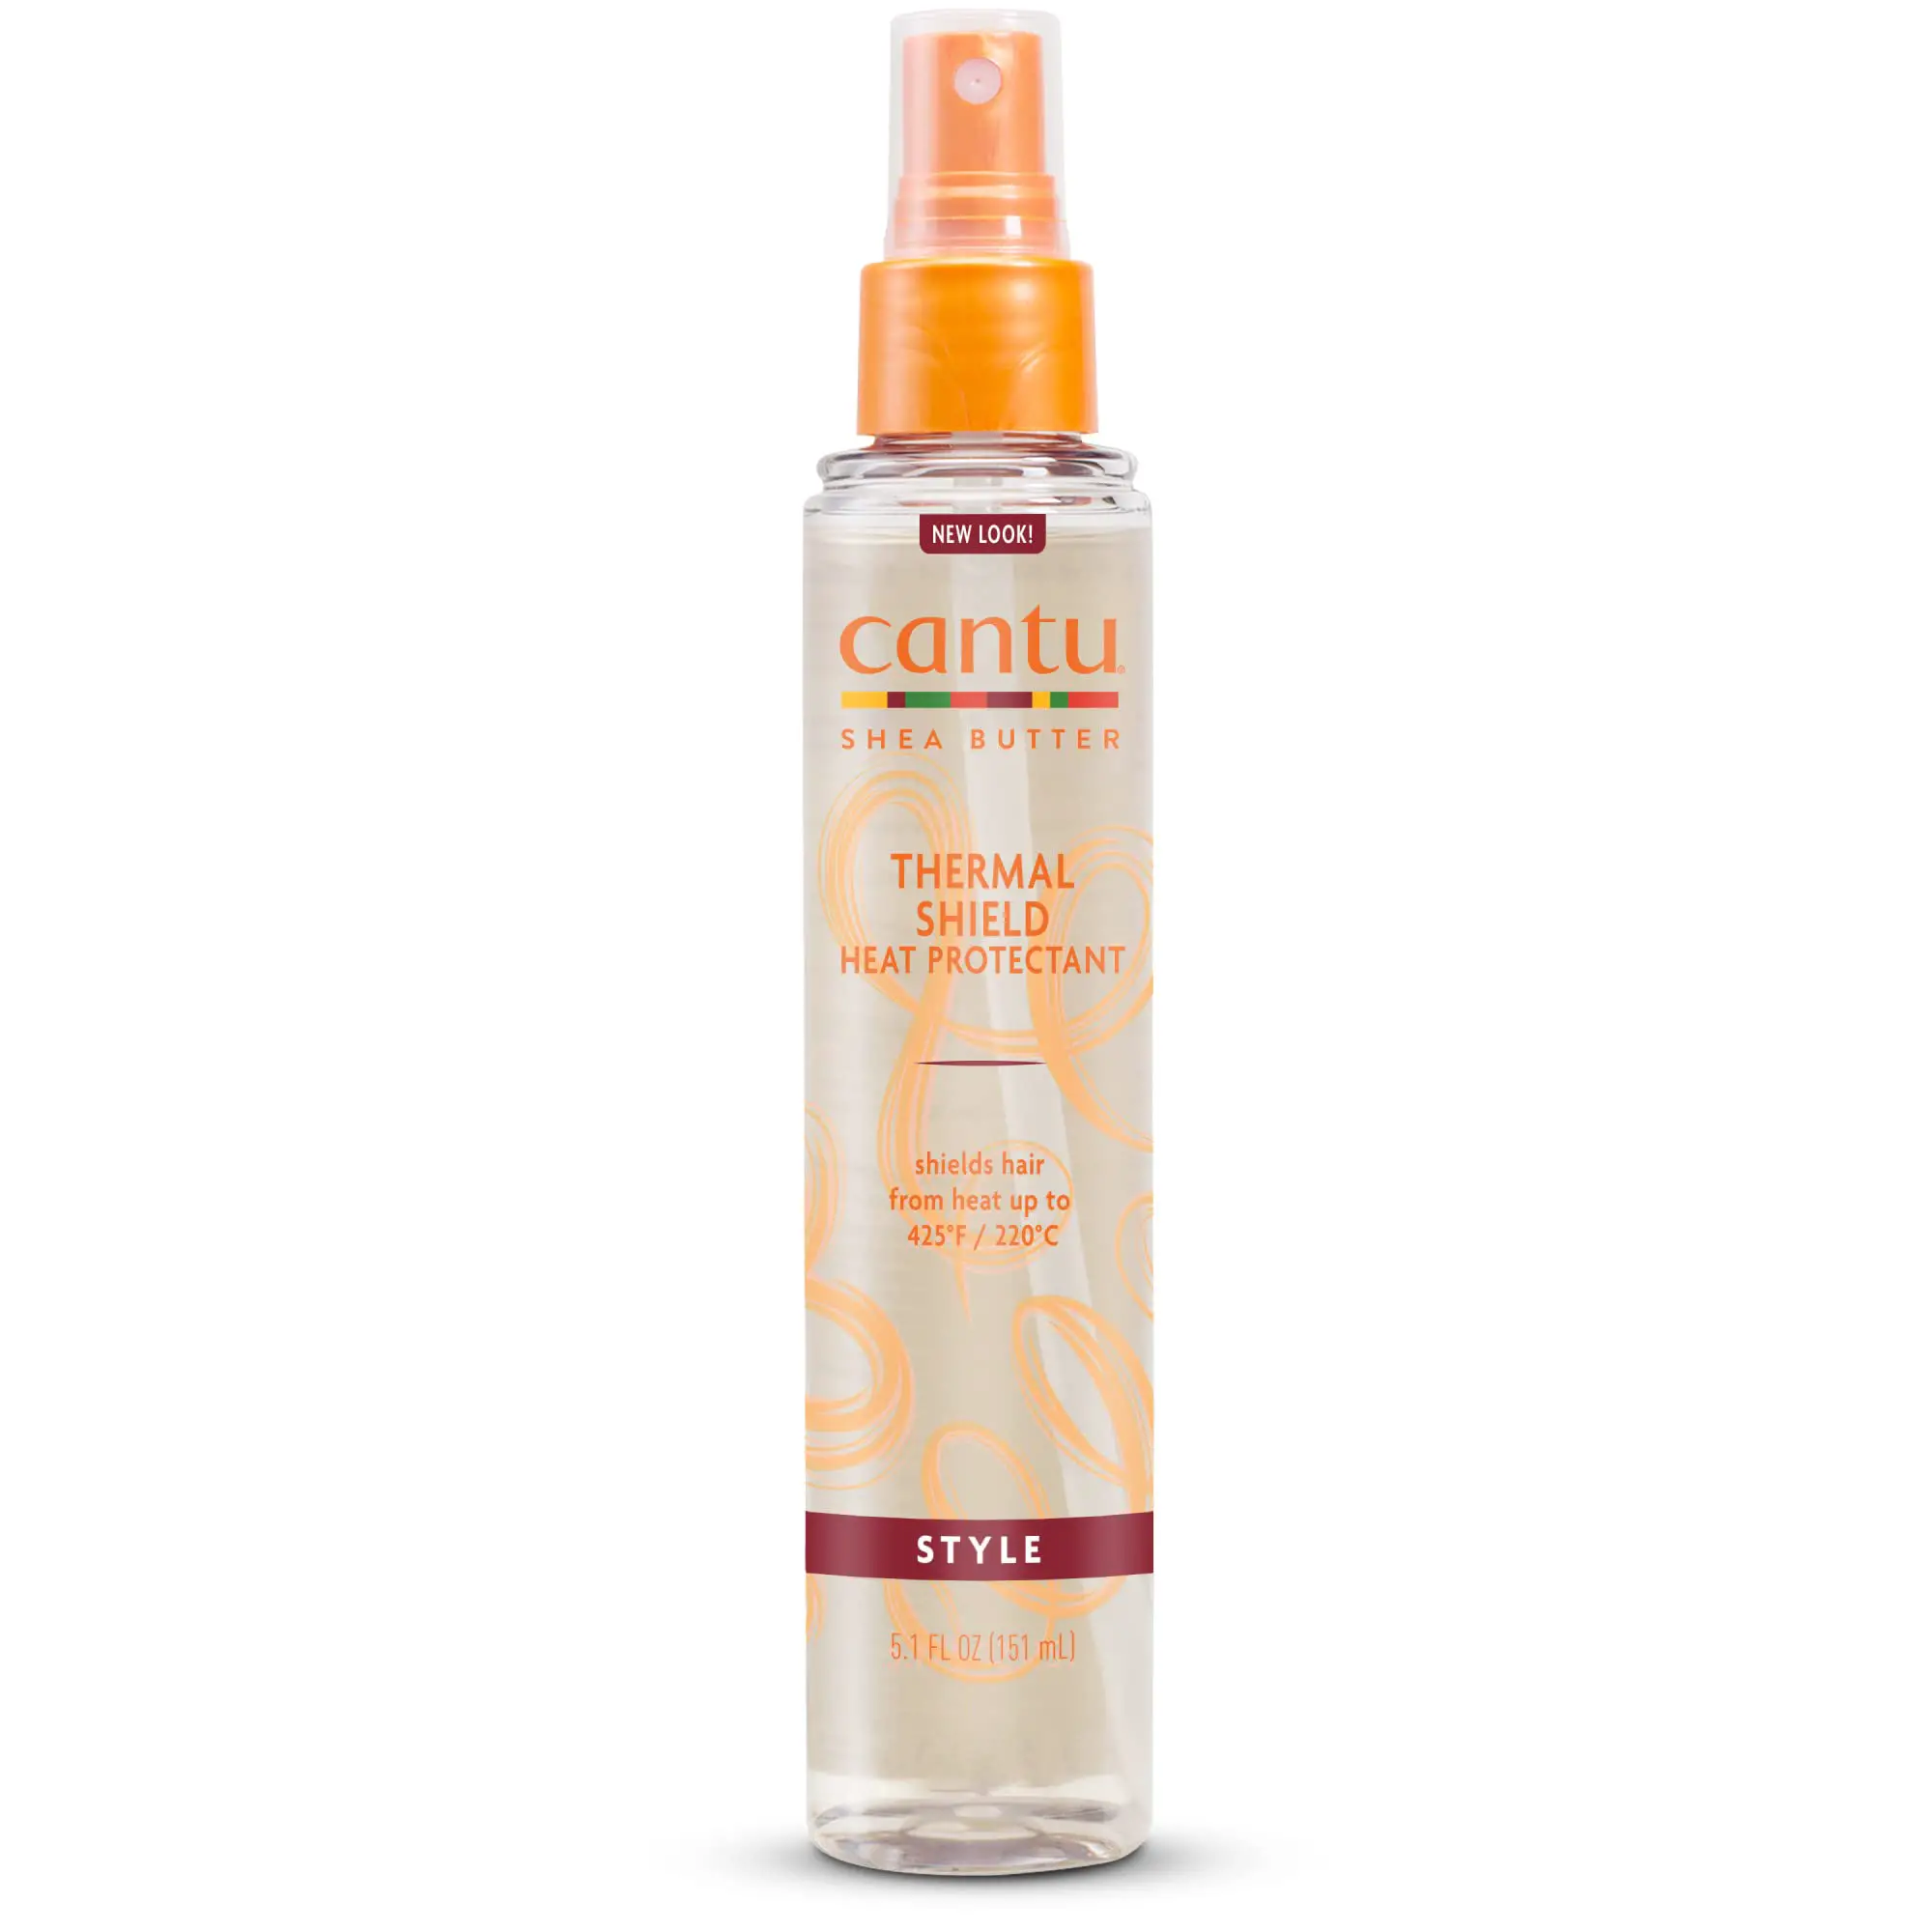 Cantu Thermal Shield Heat Protectant with Shea Butter